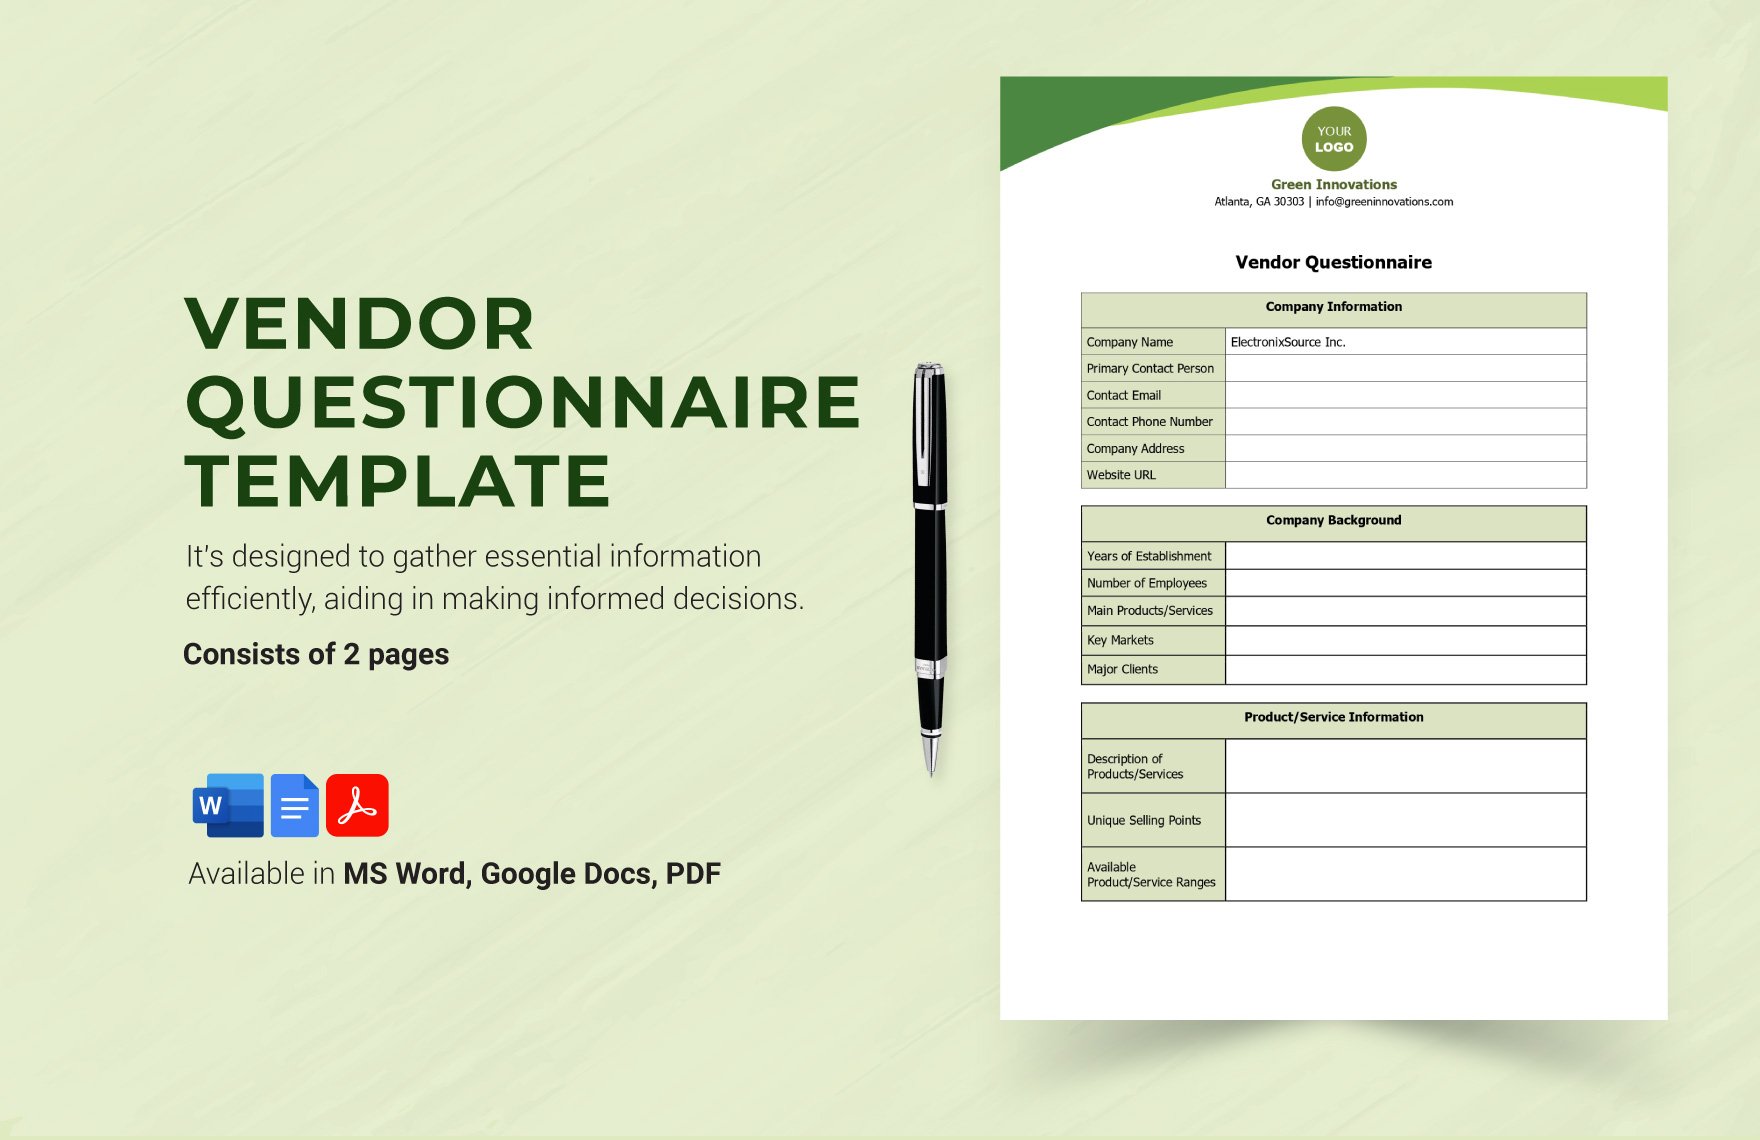 Free Vendor Questionnaire Template in Word, Google Docs, PDF